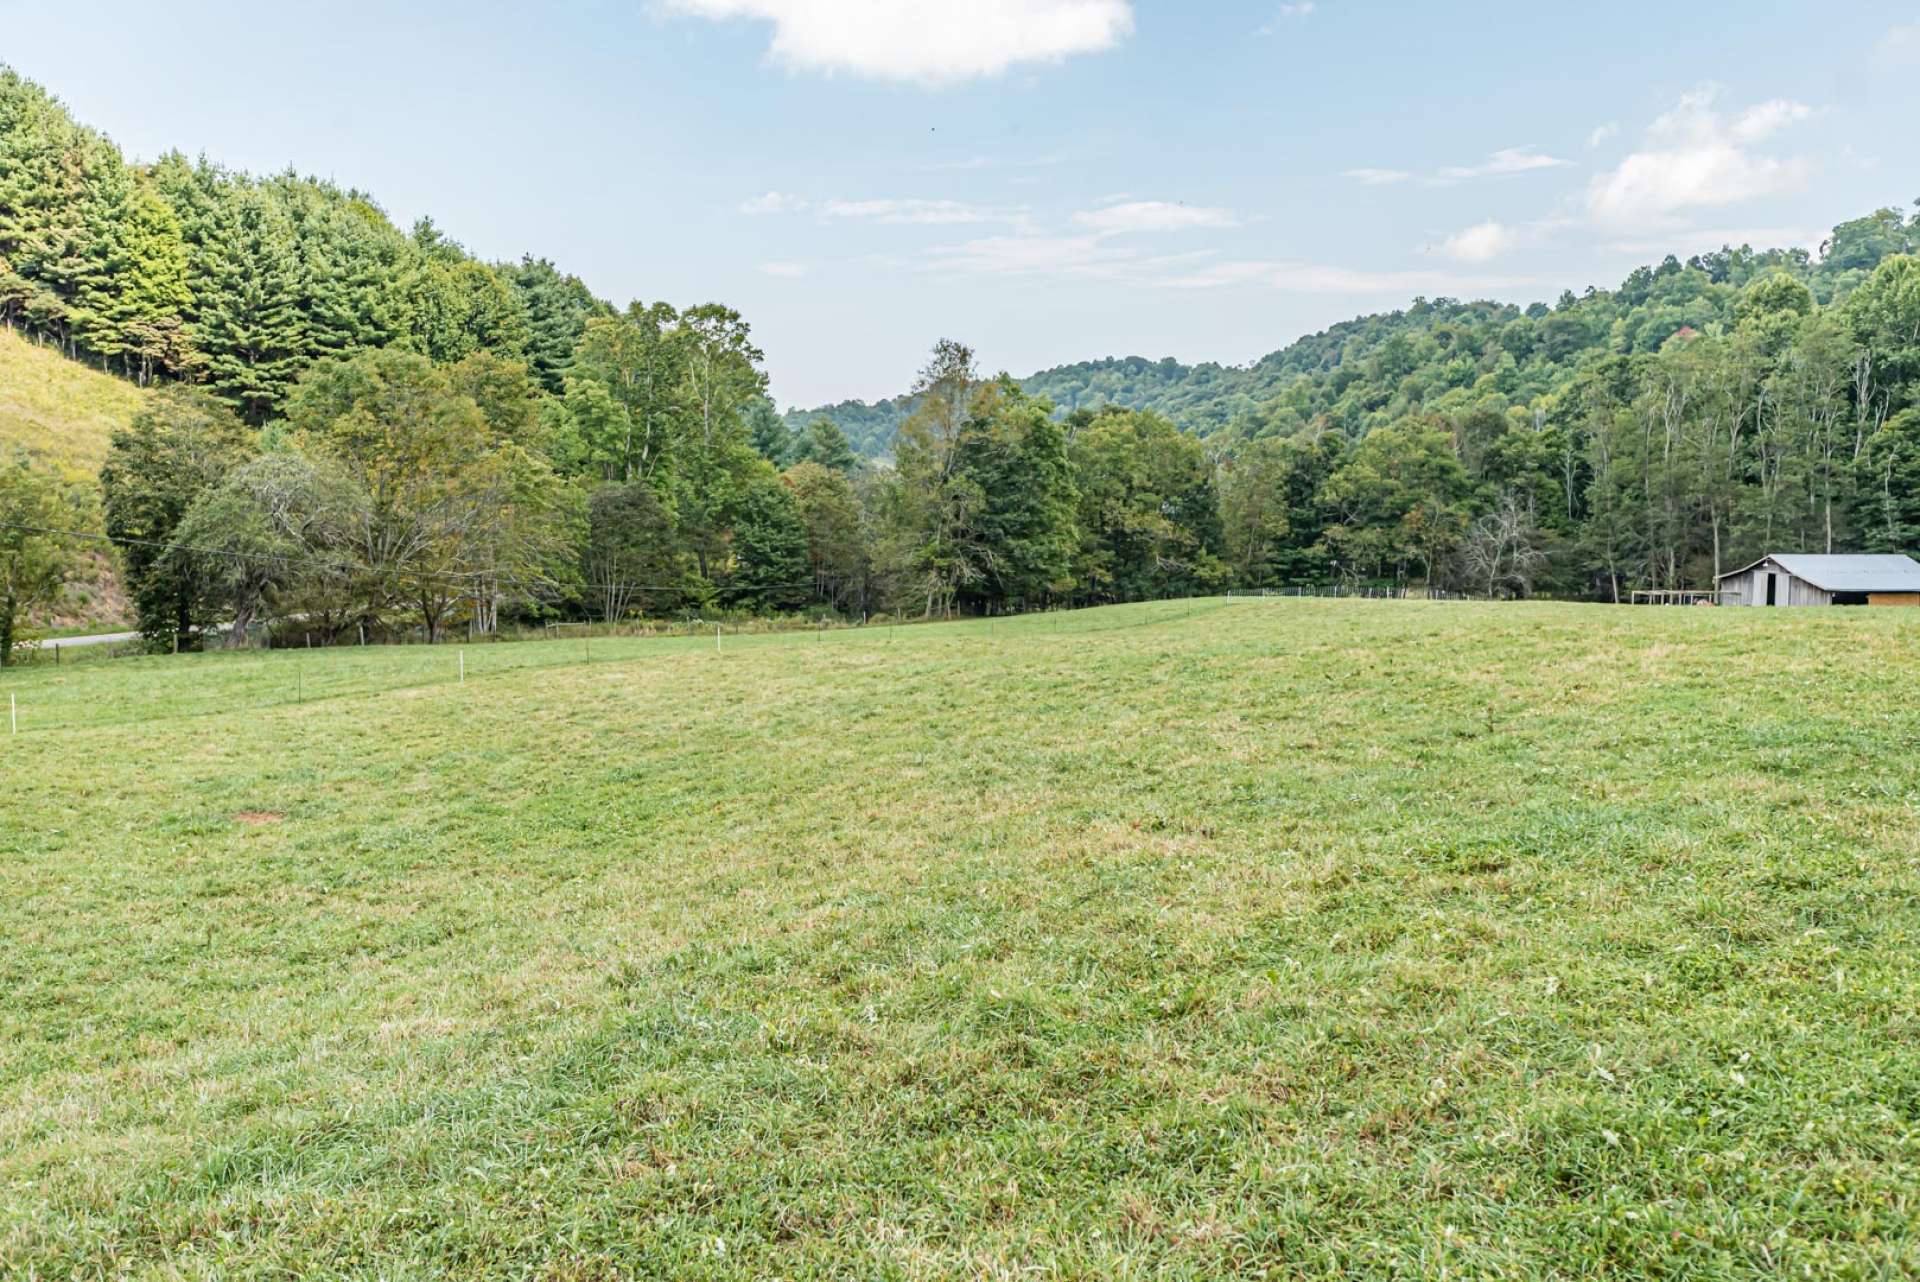 Enjoy clean mountain air and plenty of room to roam on this meticulously maintained farm in the country. A mixture of open pastures for crops or livestock, and woodlands for exploring or hunting makes this property perfect for those wanting to experience farm life or enjoy a private mountain estate.